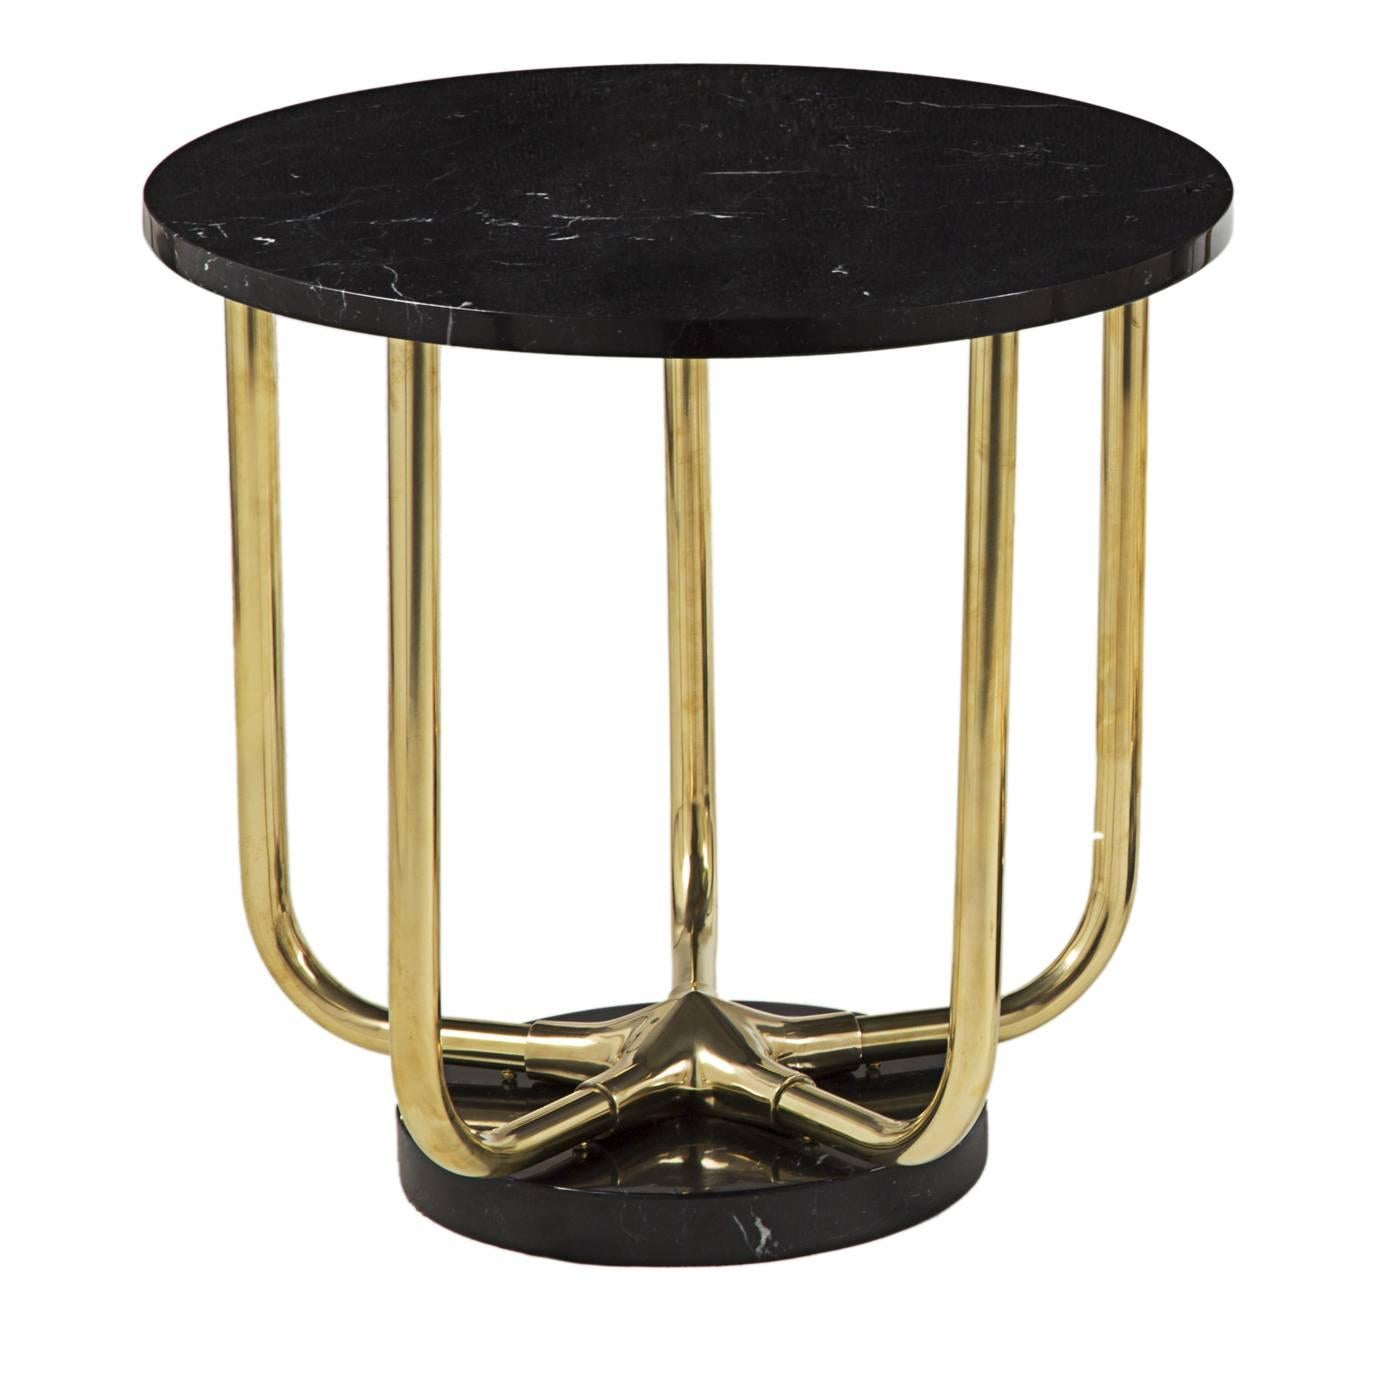 Star 1 Side Table with Marquina Marble